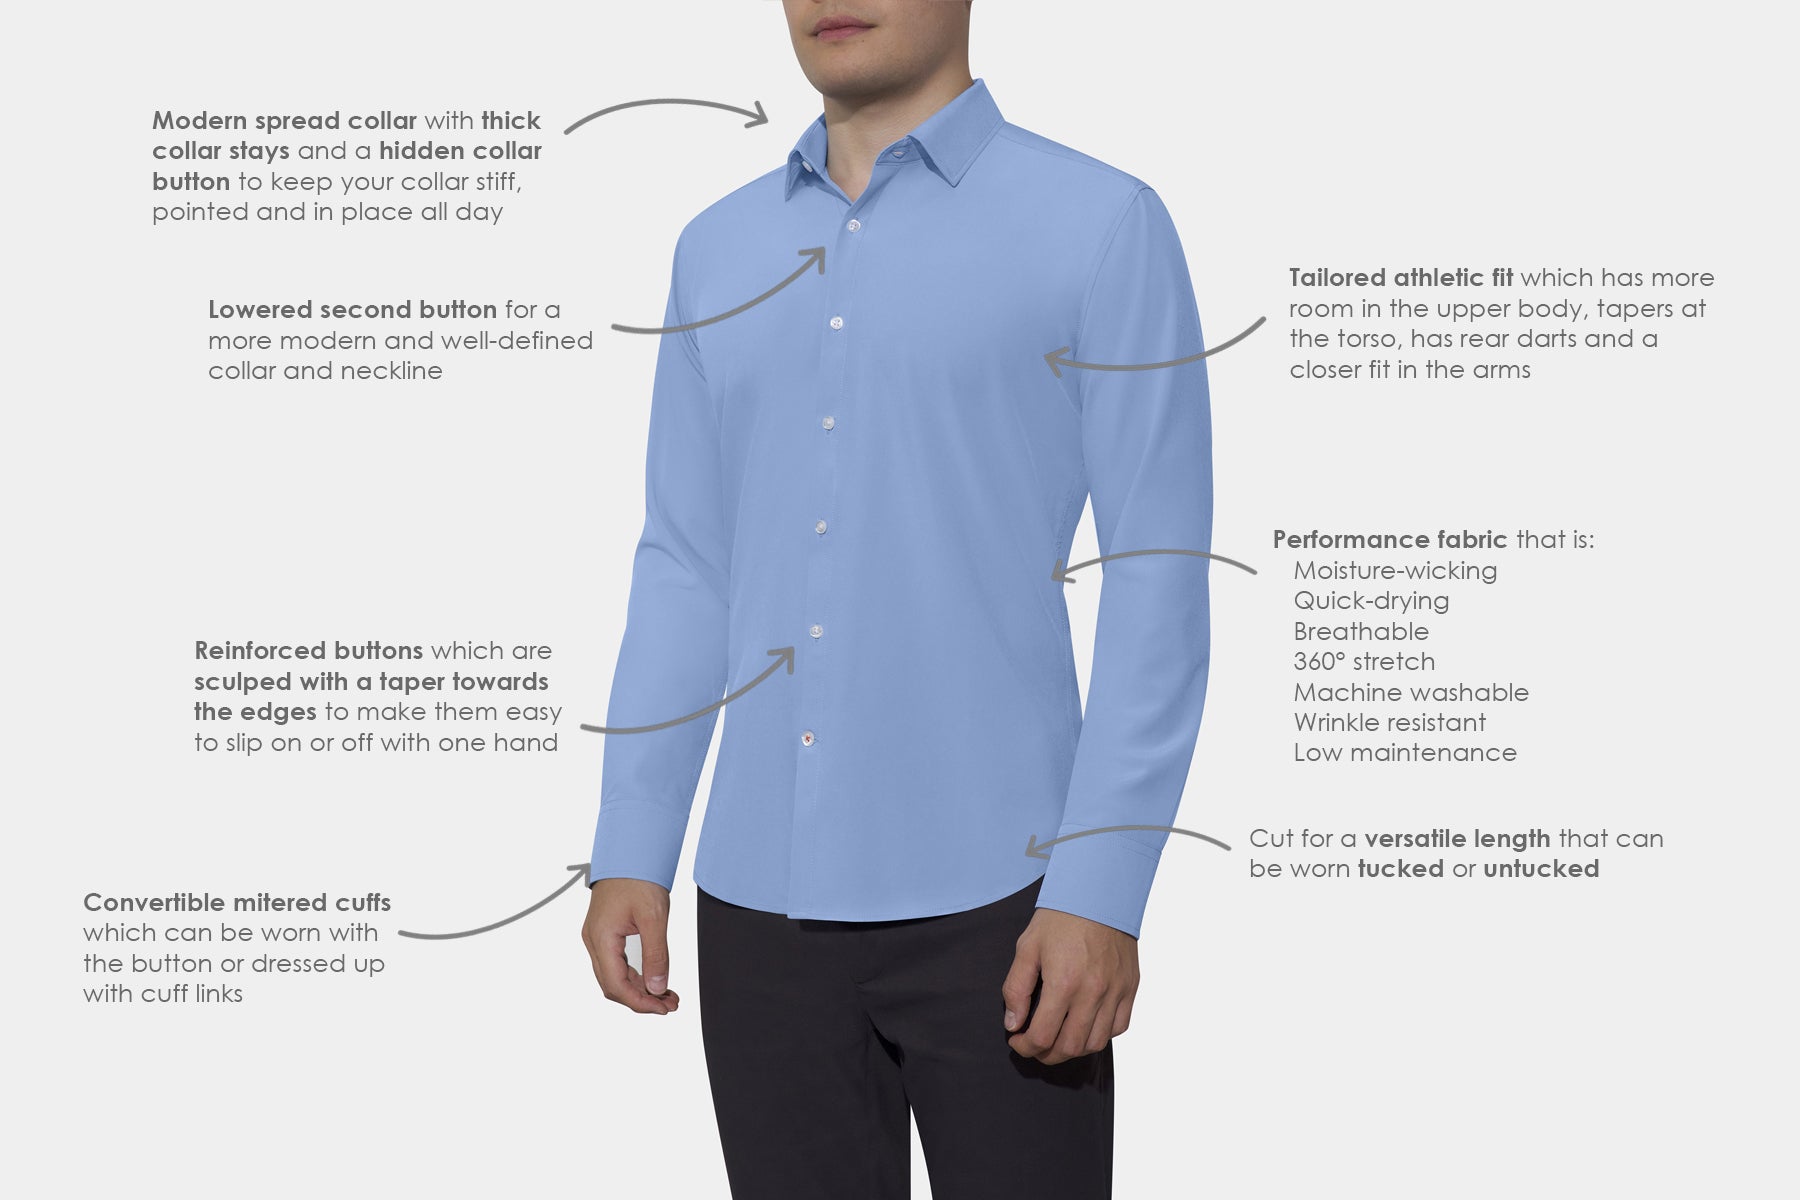 Untucked Total Stretch Slim Fit Solid Shirt